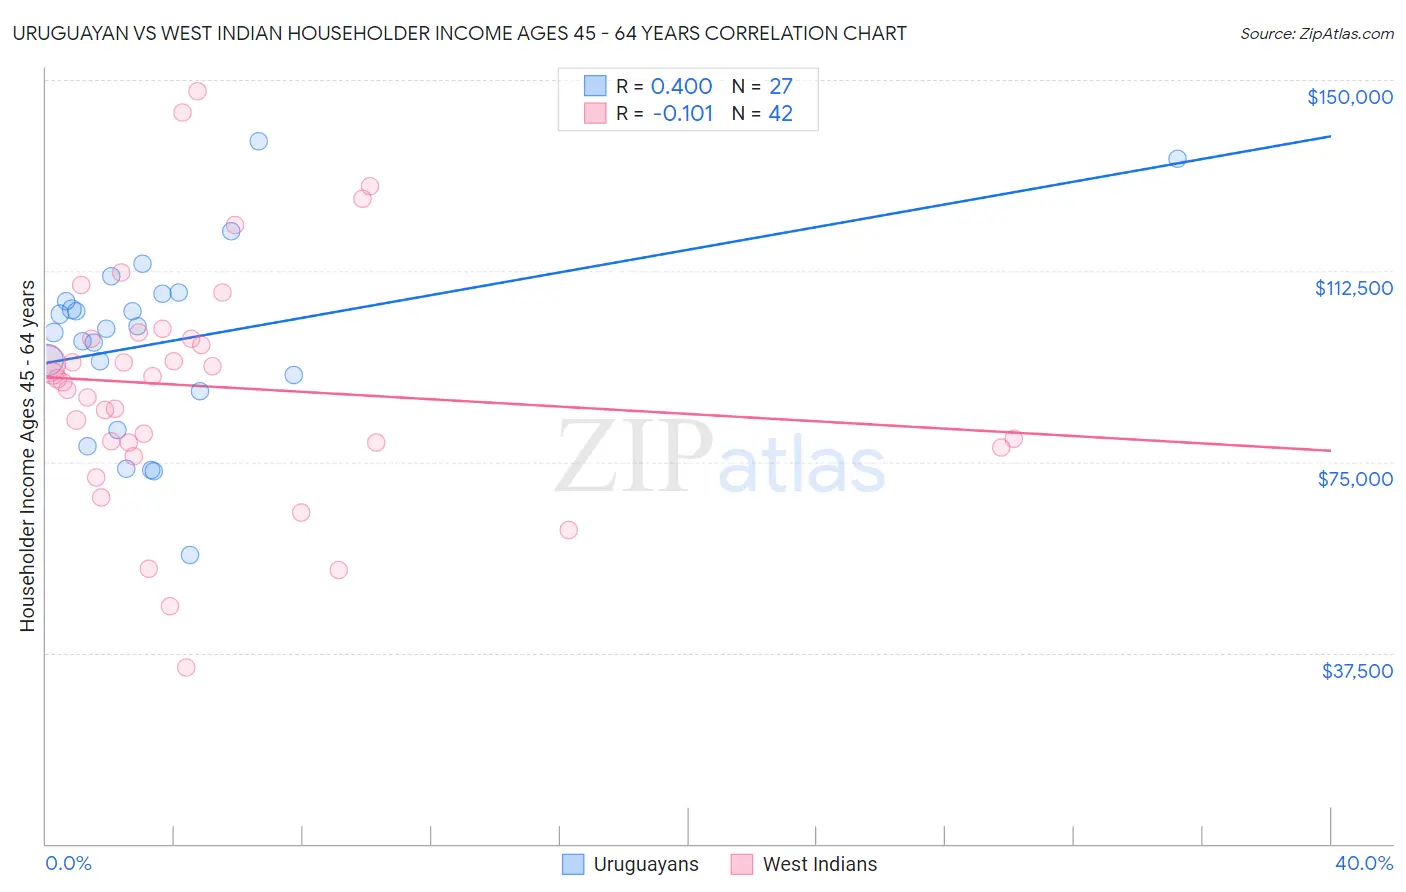 Uruguayan vs West Indian Householder Income Ages 45 - 64 years